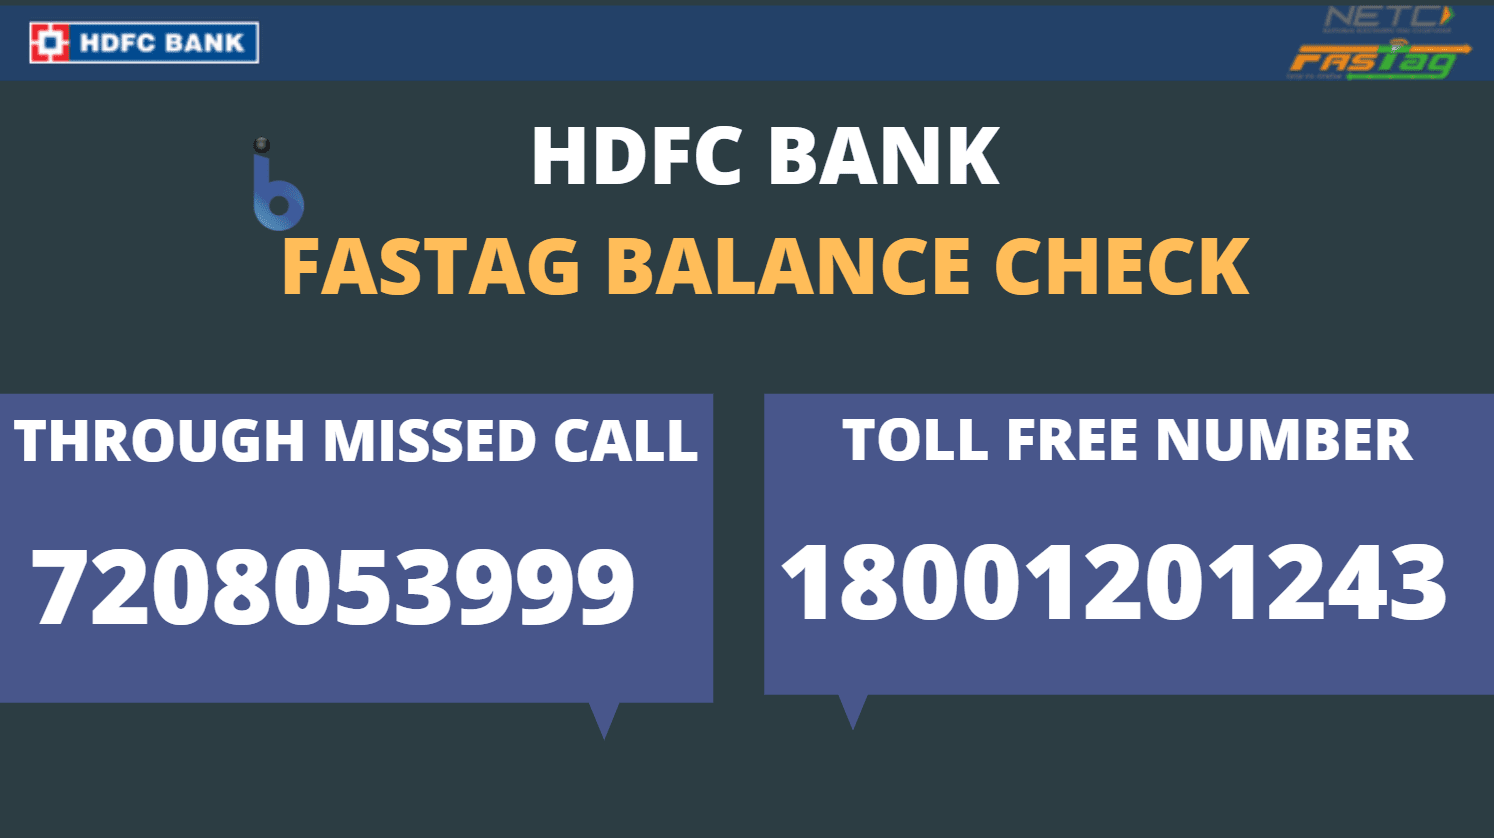 6 Ways to Check HDFC Bank Fastag Balance Online